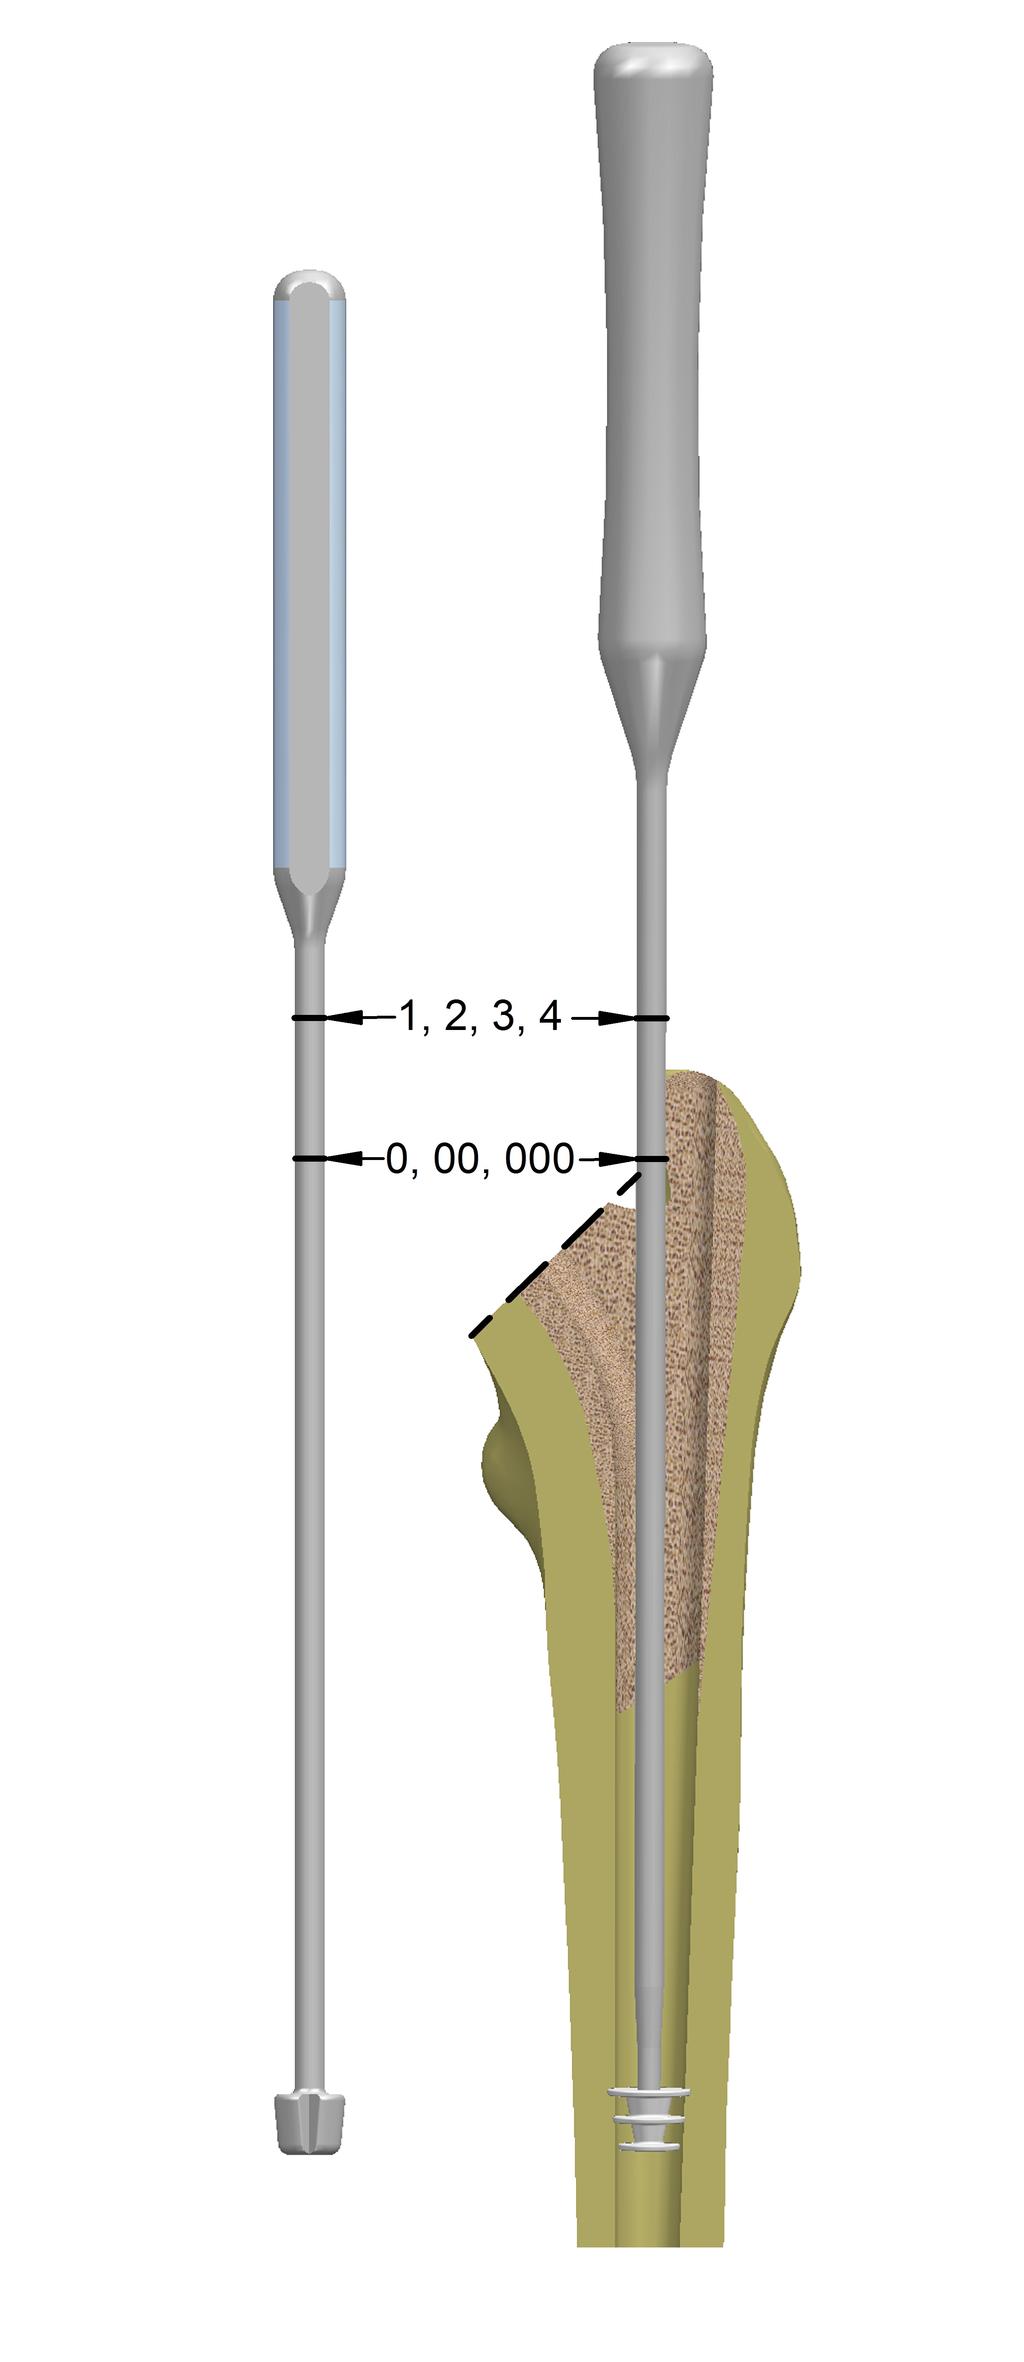 Sizes 000, 00 and 0 offer a decreased selection of neck offsets to maintain implant strength.